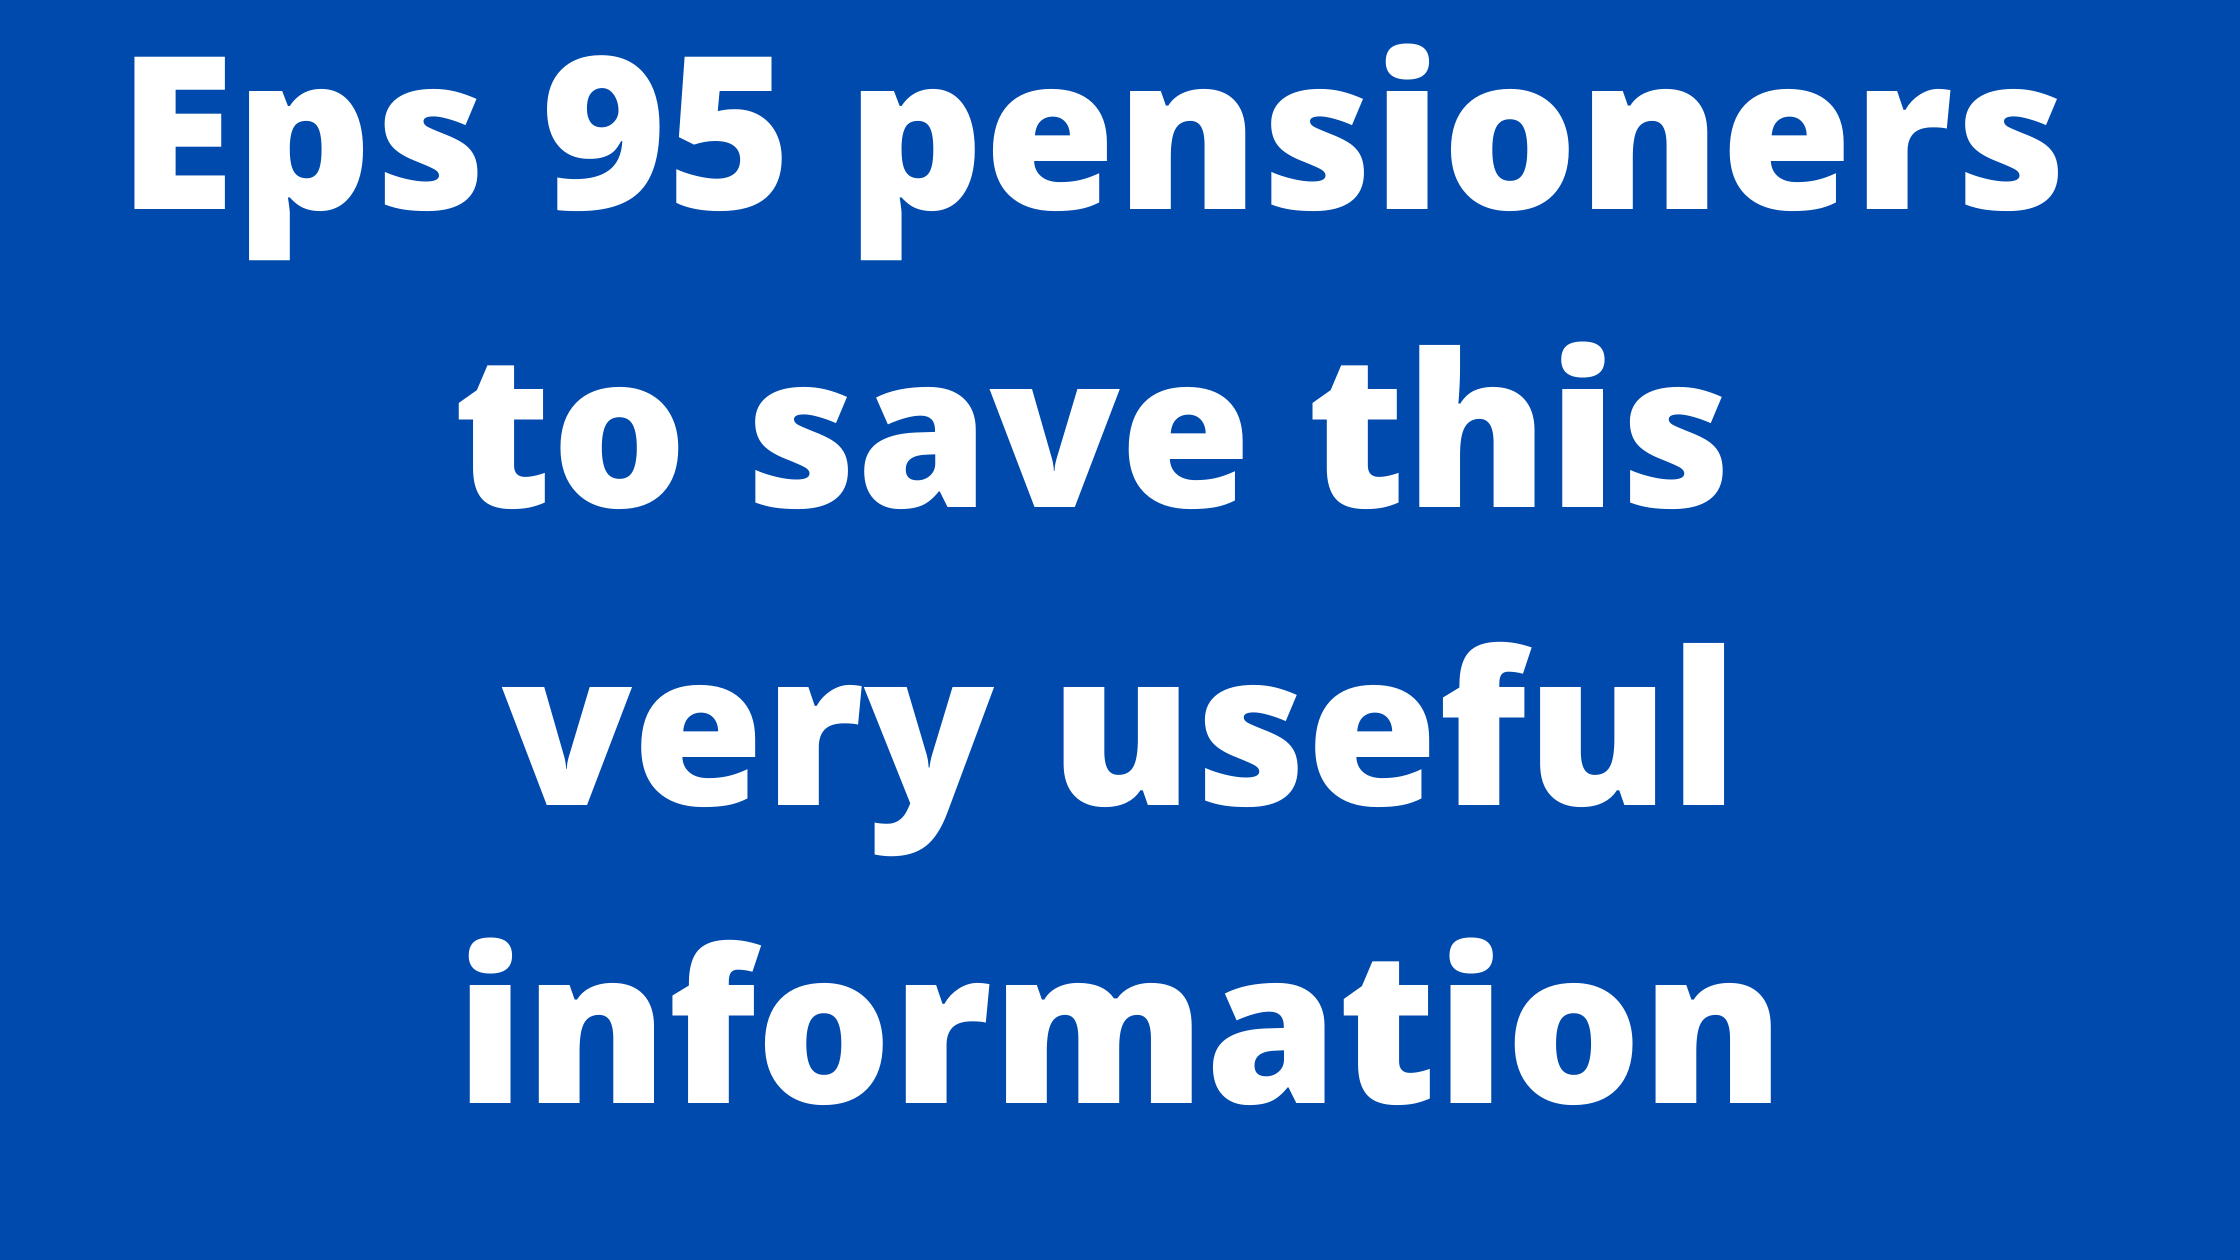 Eps 95 Pensioners to save very useful information